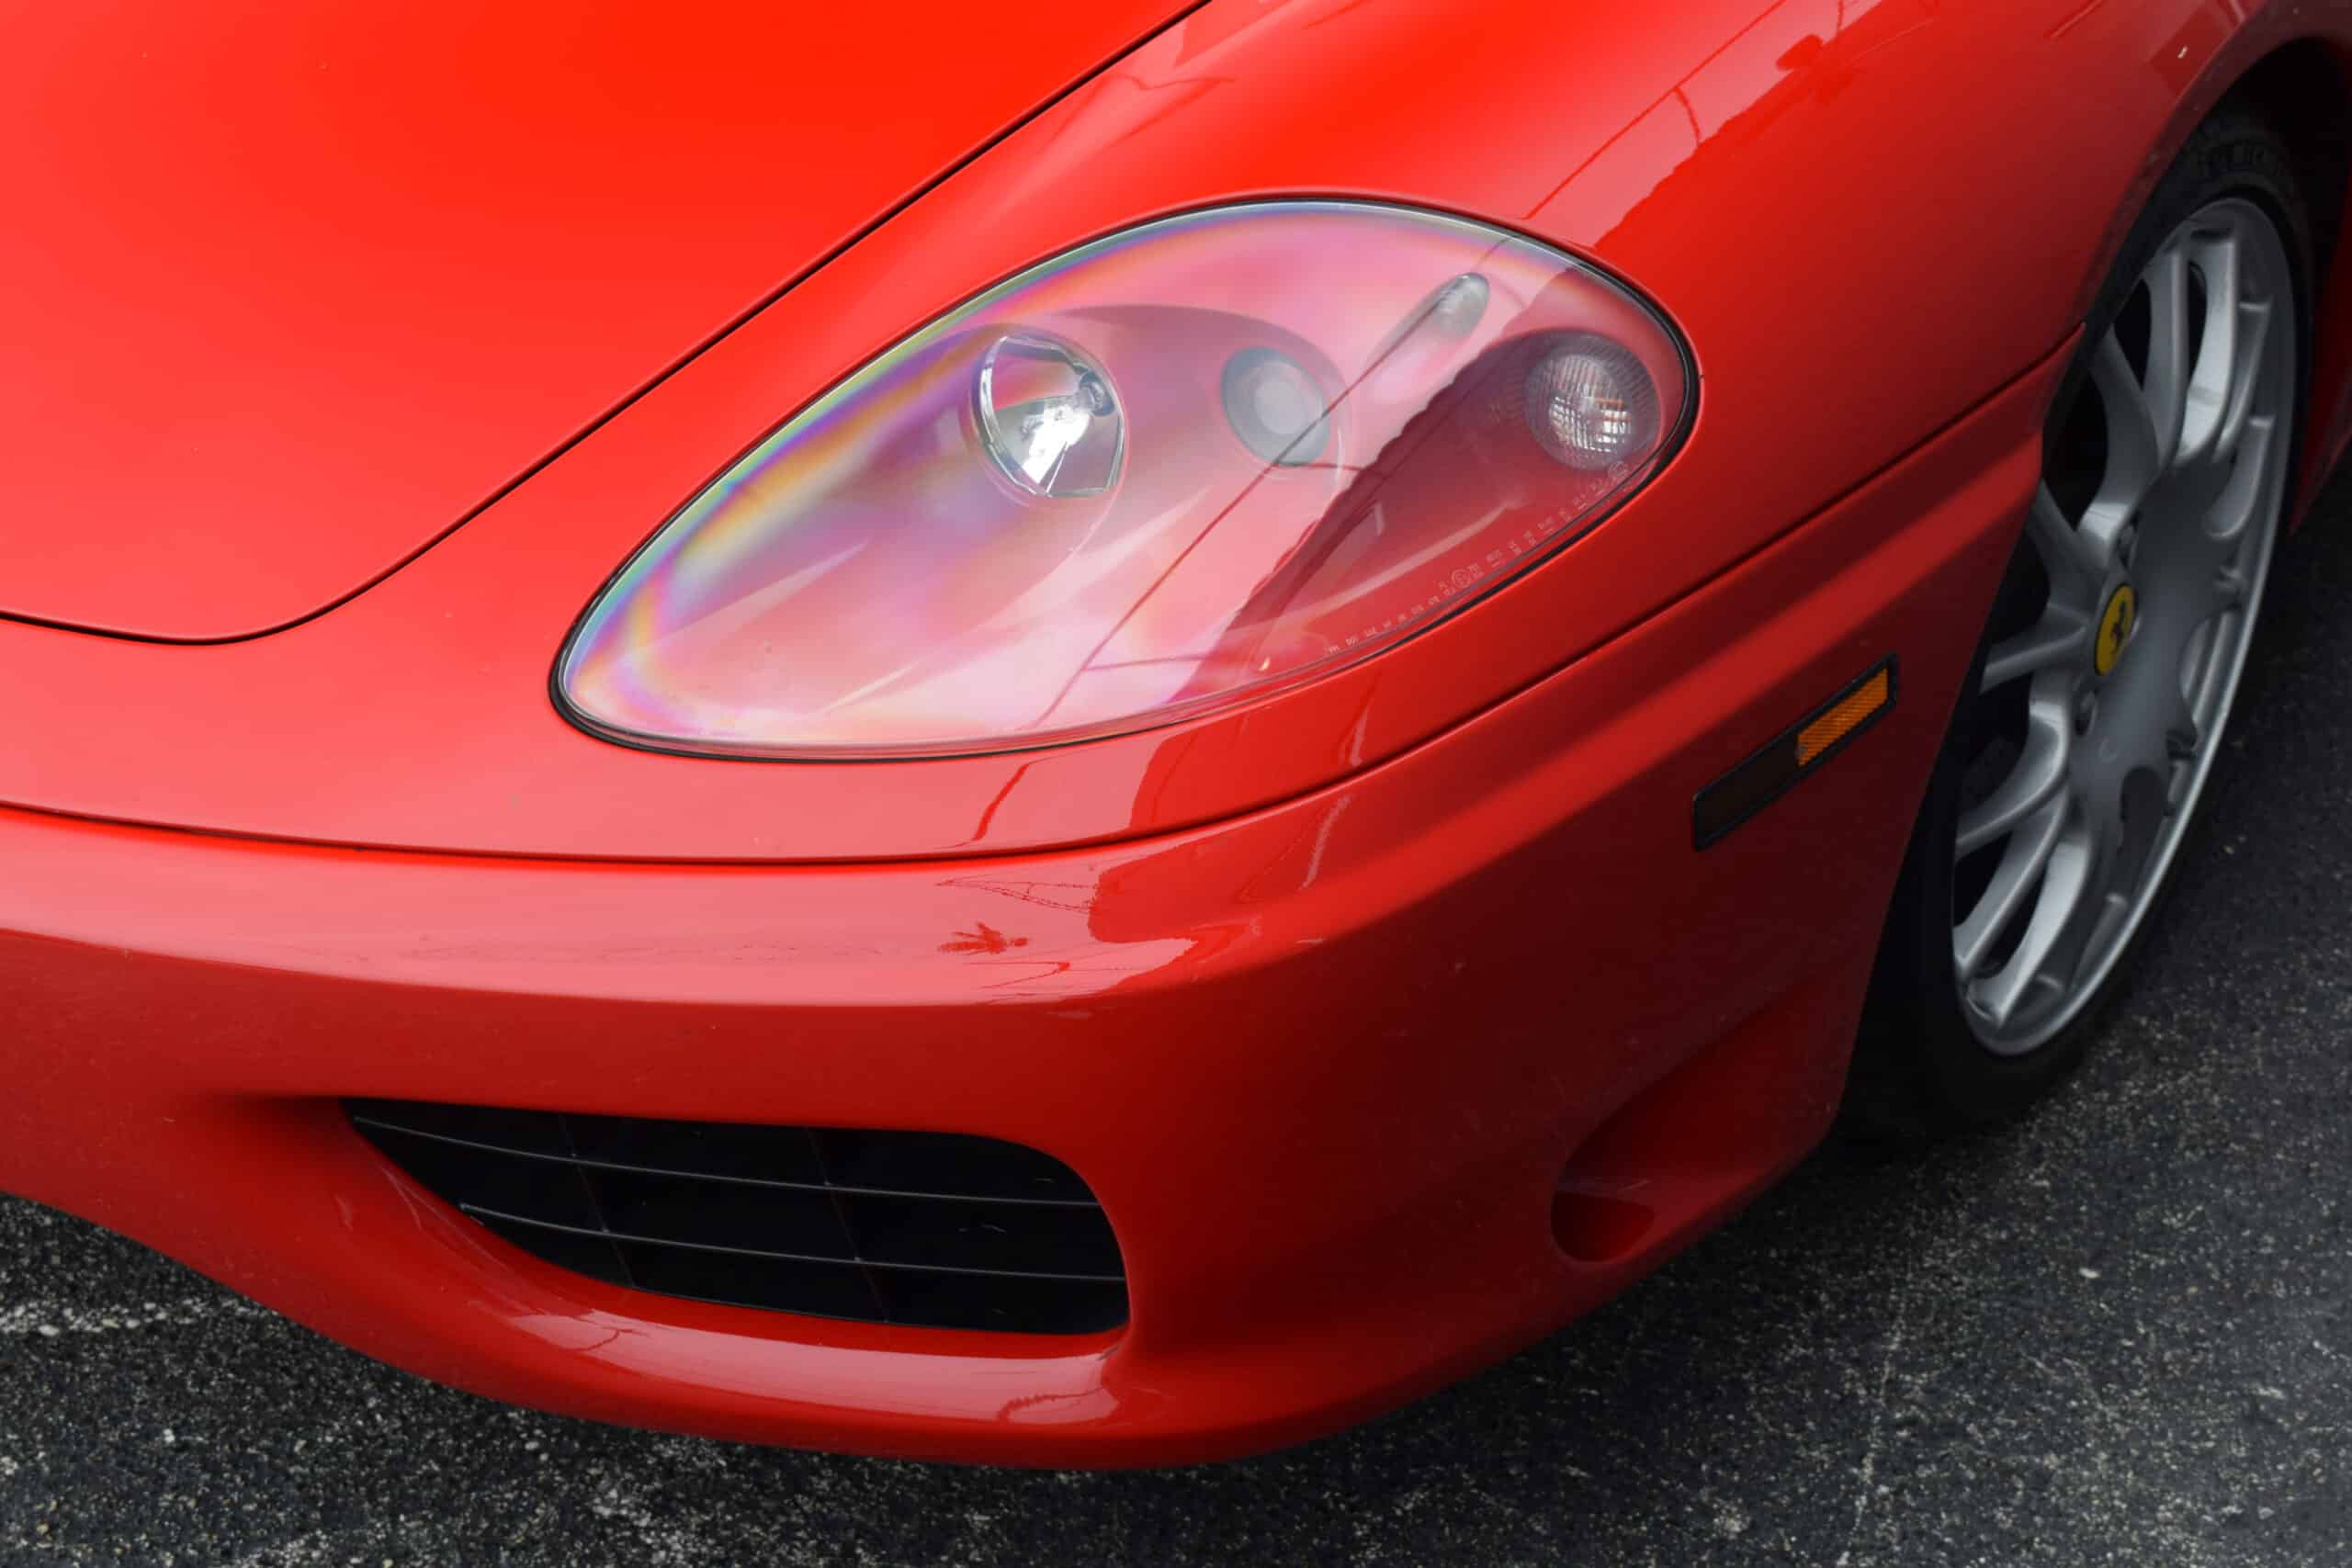 1999 Ferrari 360 Modena Coupe 6-Speed Gated 6-Speed! low miles, Challenge Stradale Wheels and Grille, current belt